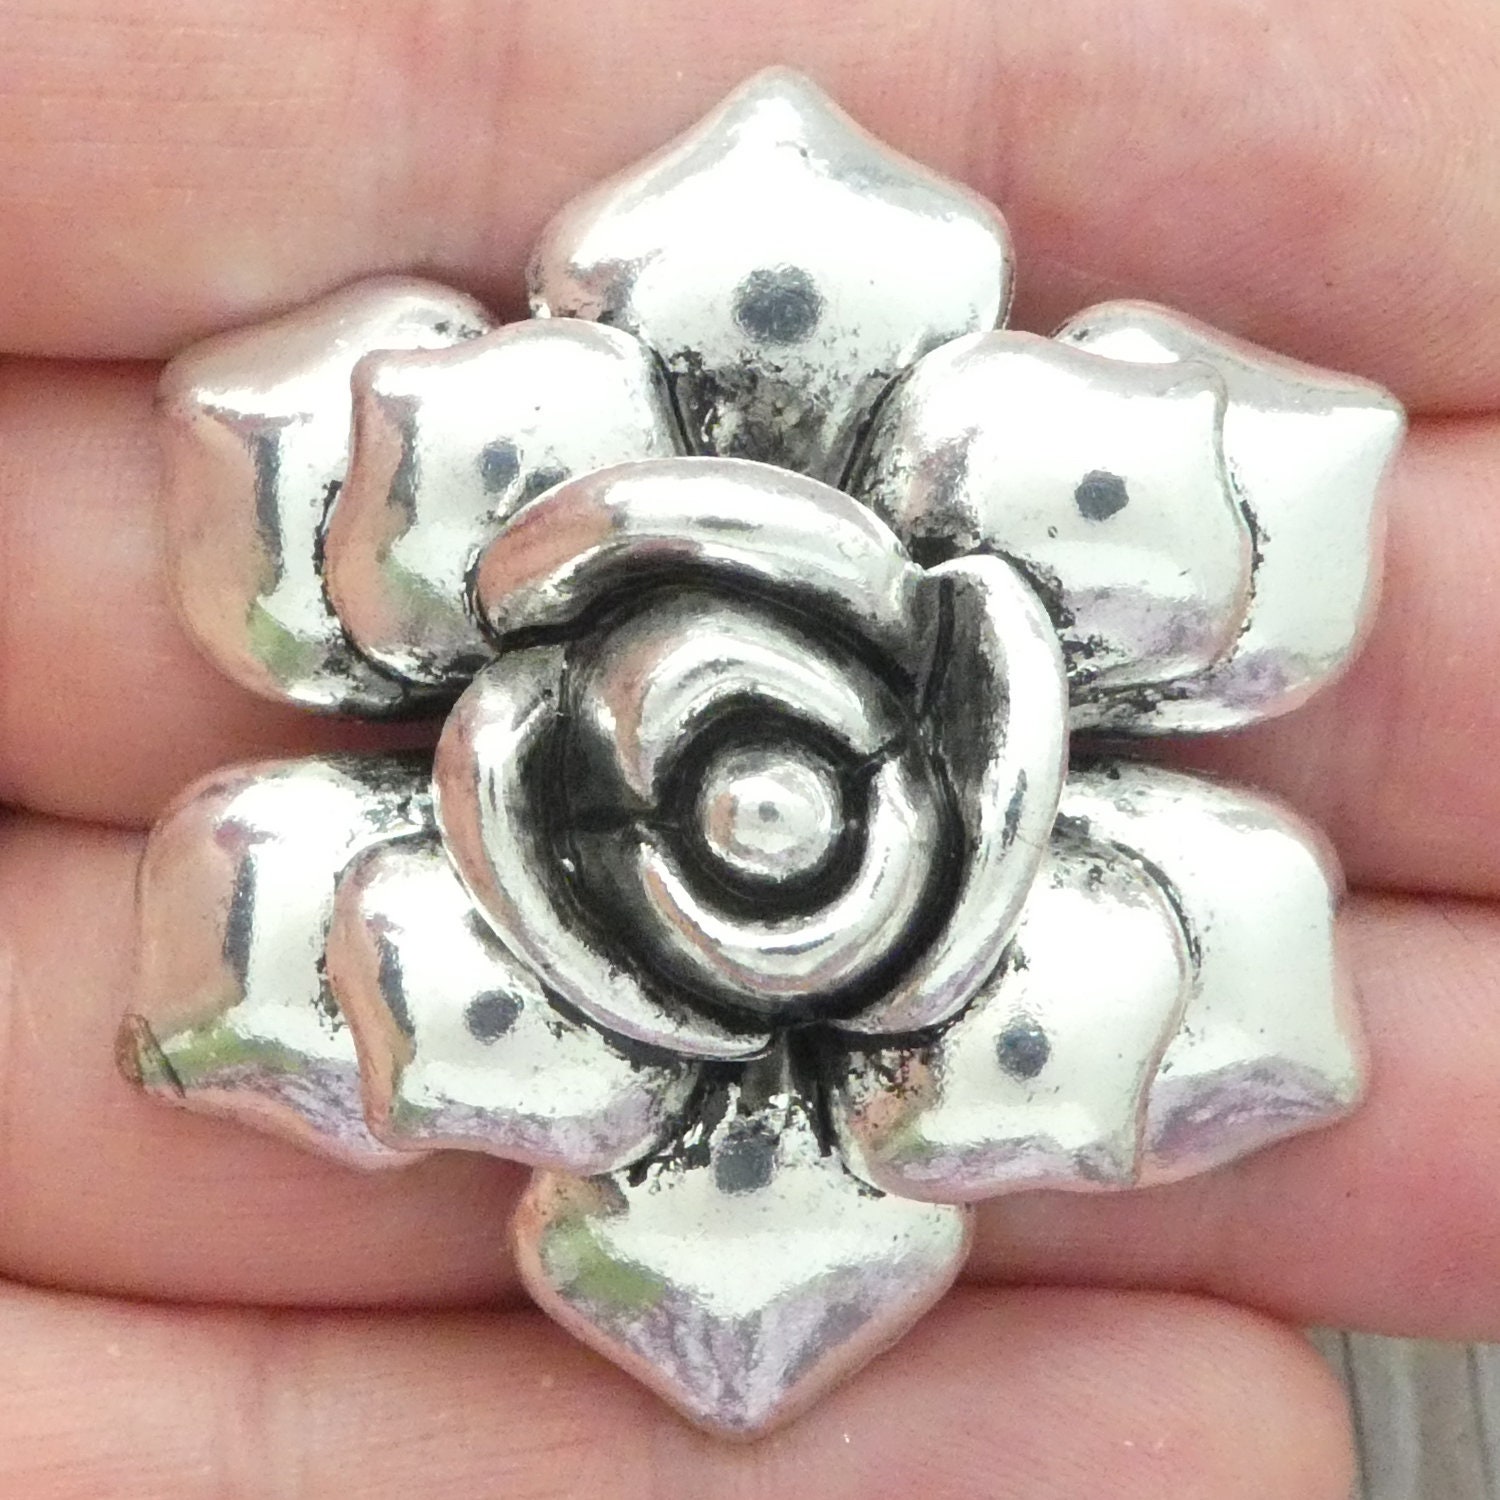 2 Silver Rose Charm Flower Pendant by TIJC SP2001